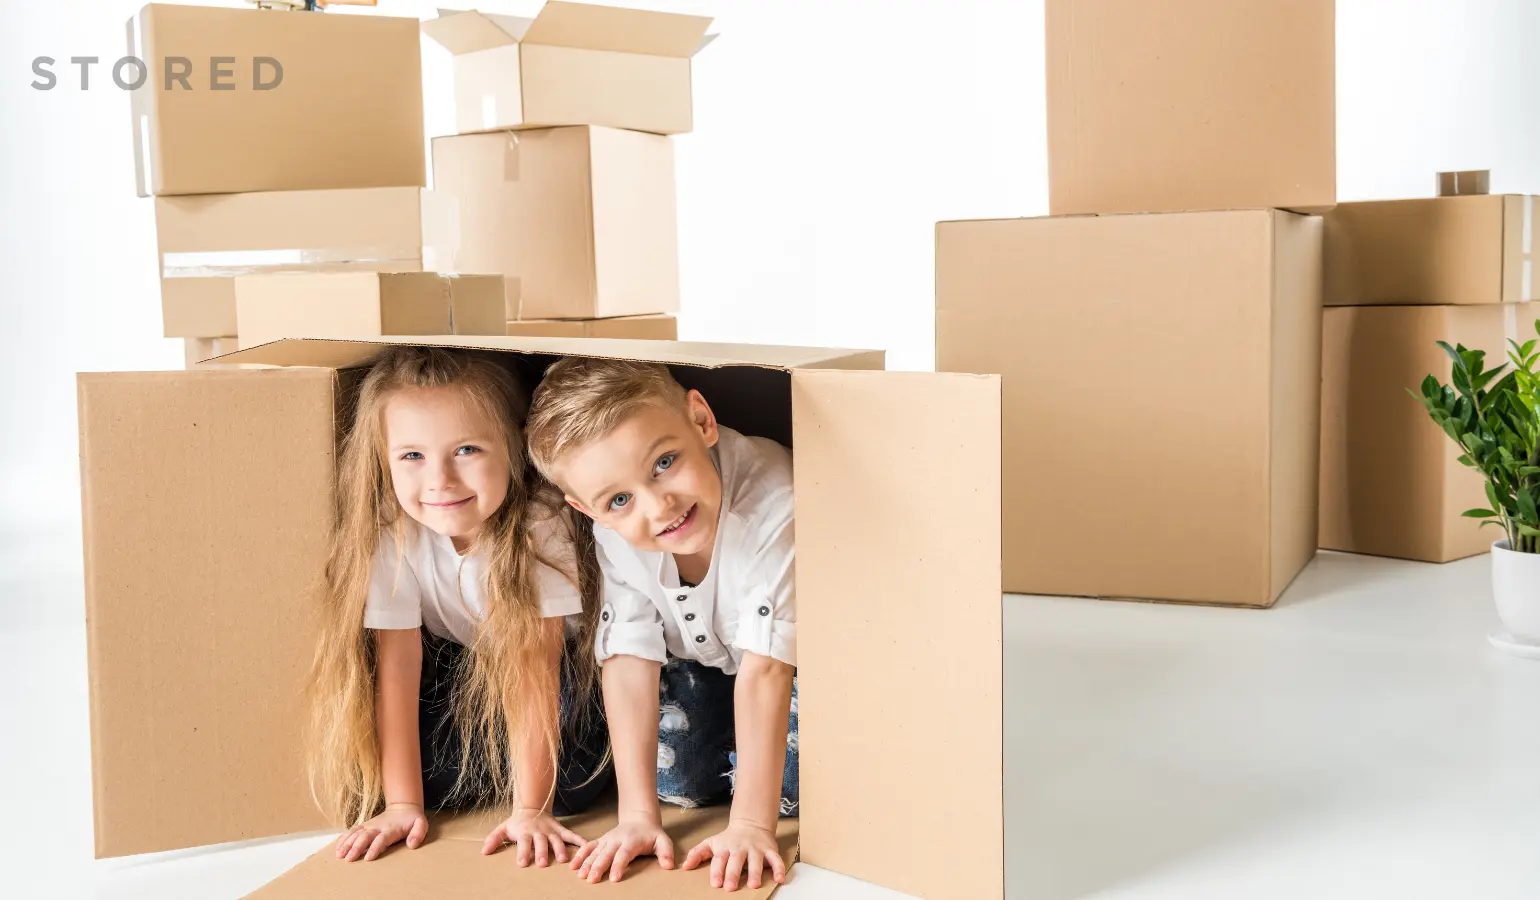 What Are the 10 Creative Ways To Use A Cardboard Box